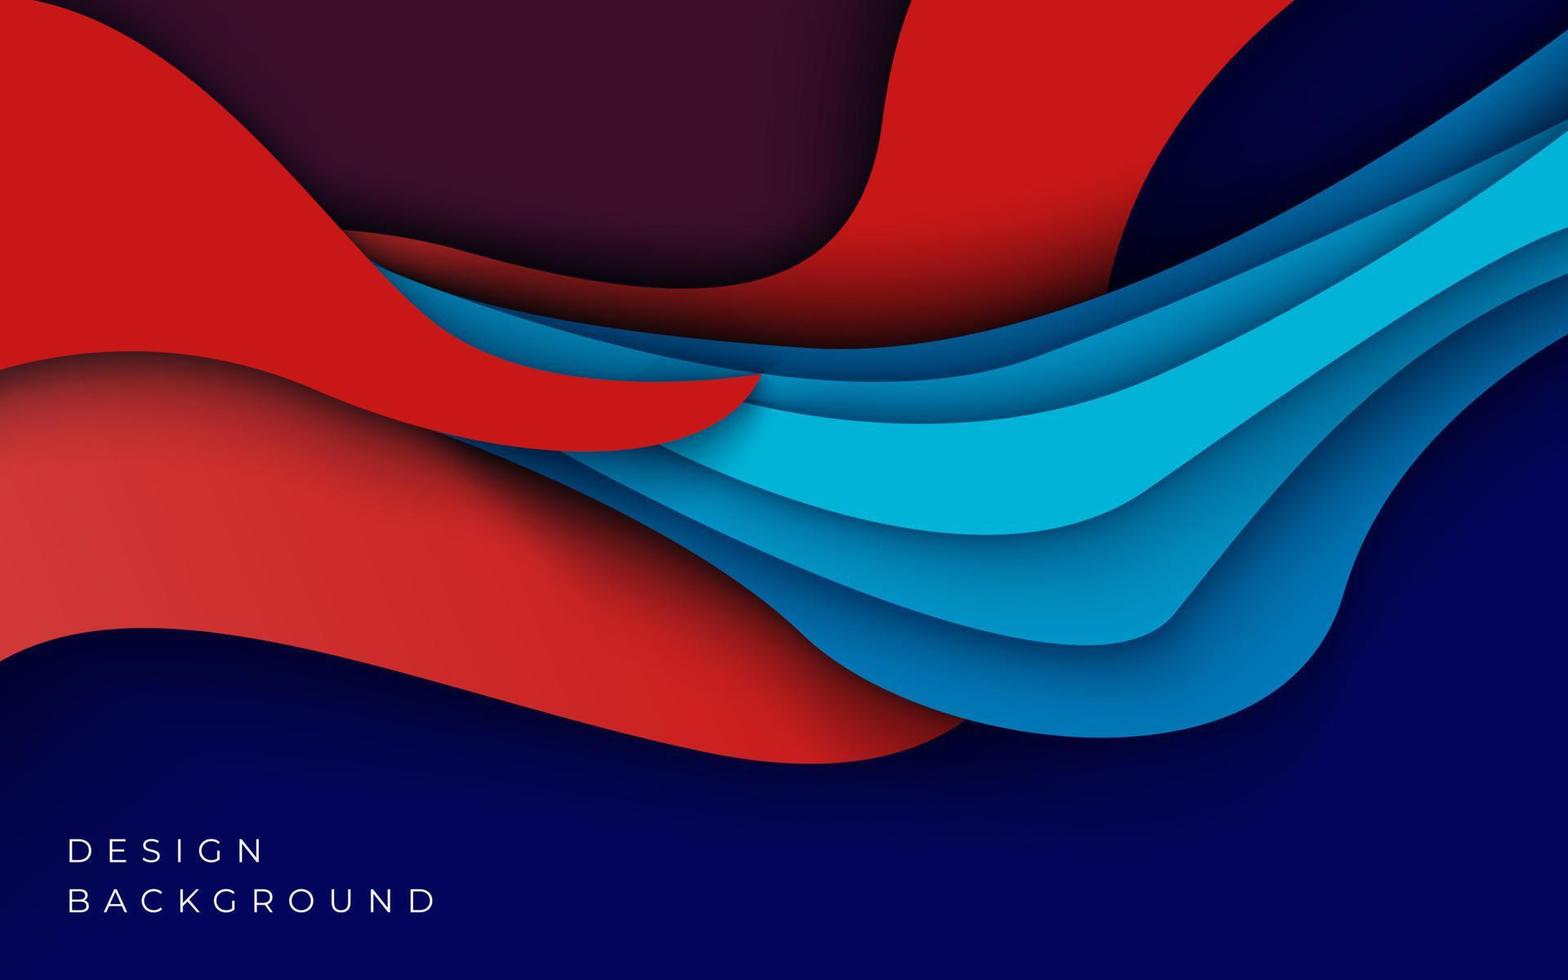 Multi layers blue an red color texture 3D papercut layers in gradient vector banner. Abstract paper cut art background design for website template. Topography map concept or smooth origami paper cut